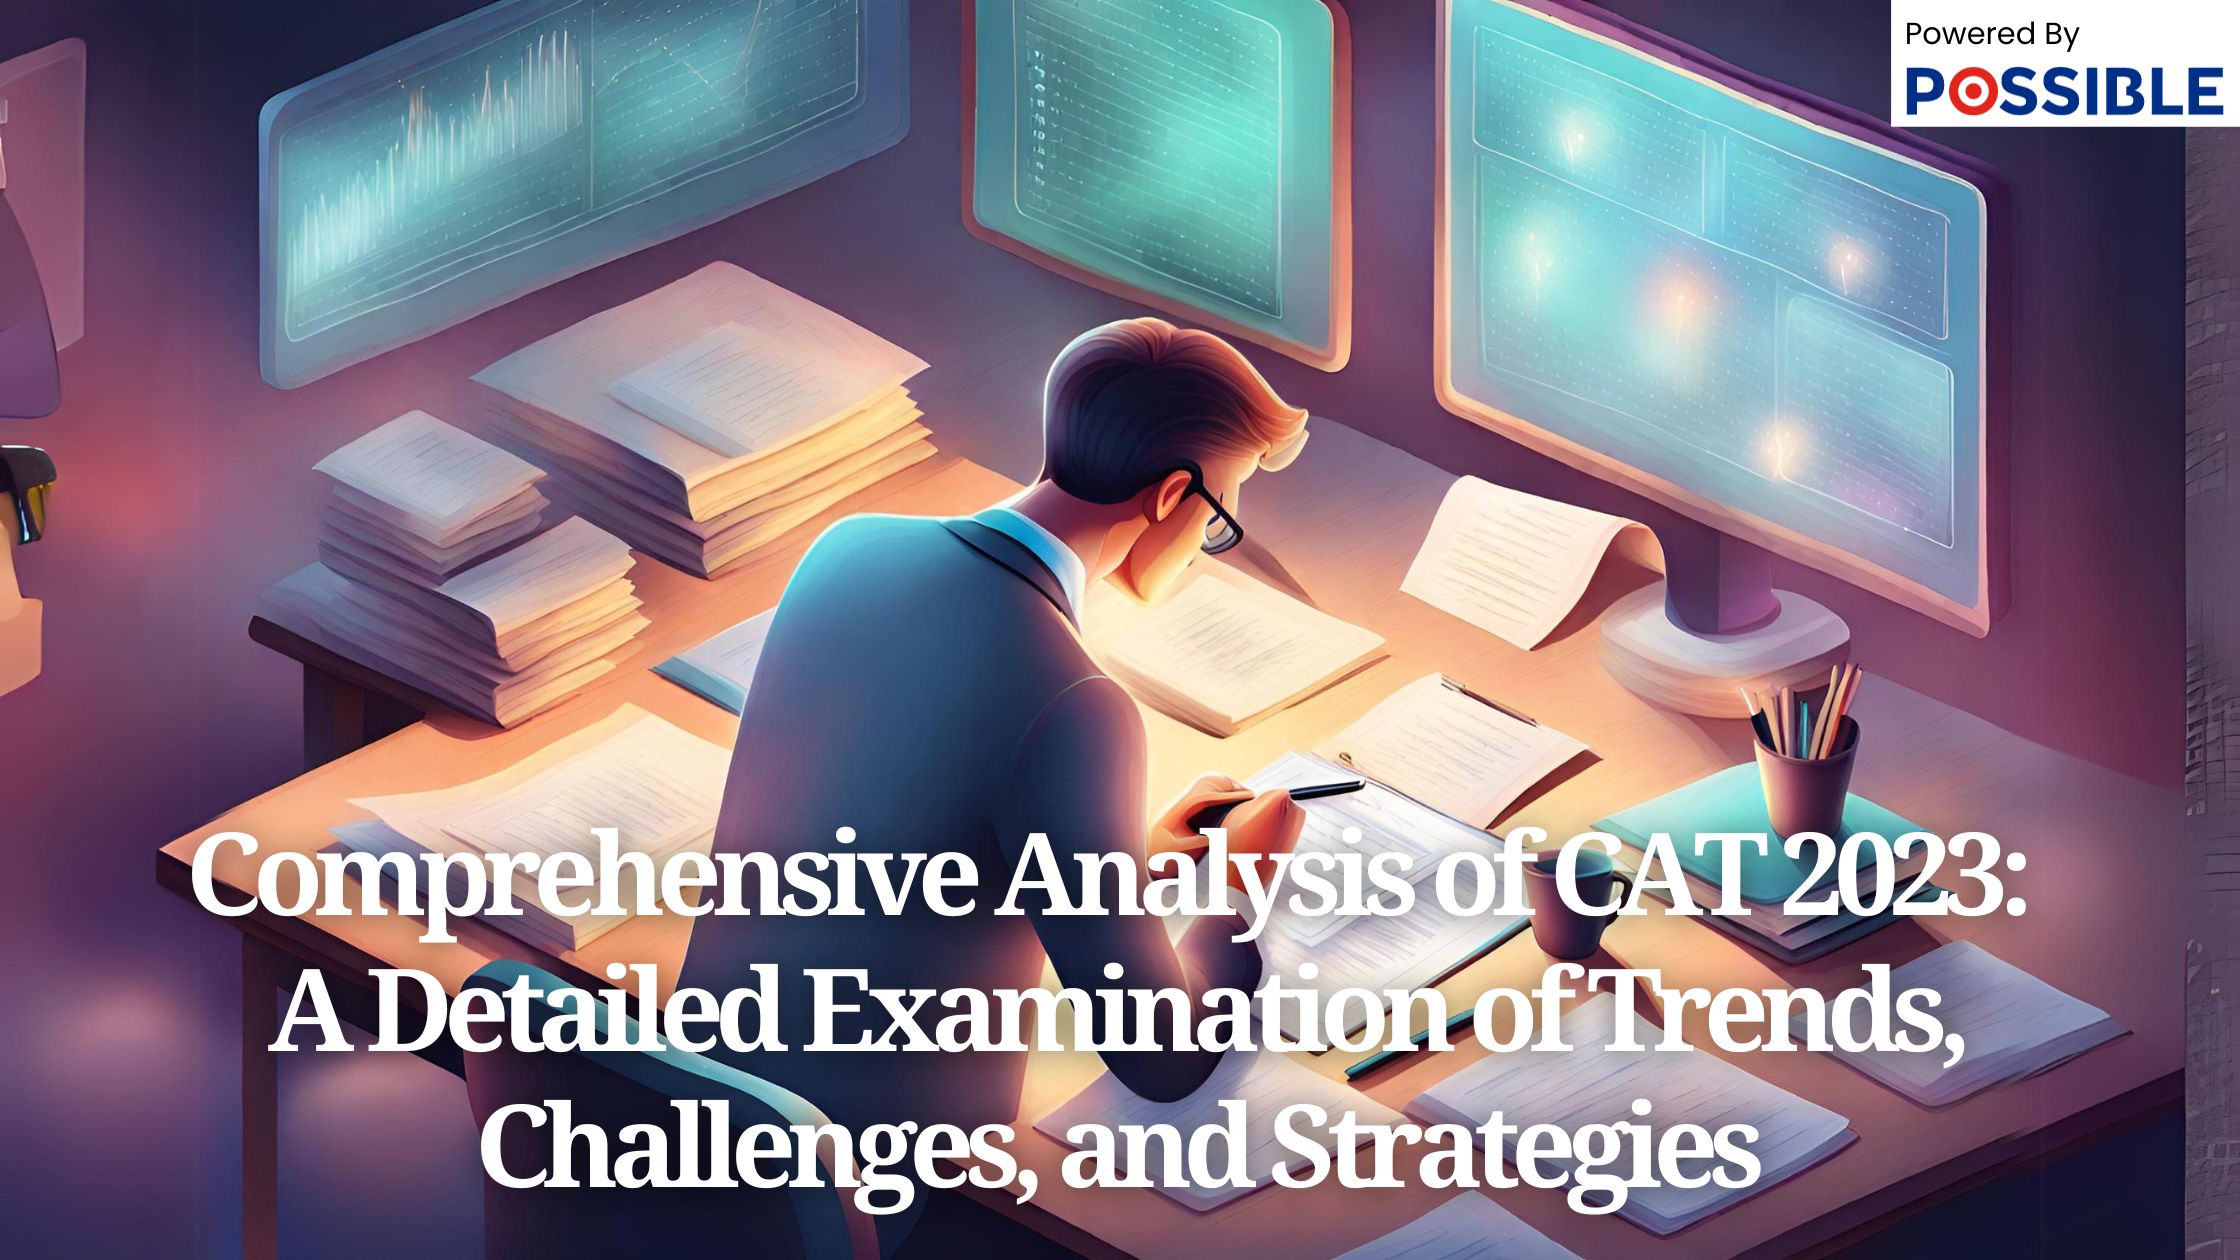 Comprehensive Analysis of CAT 2023: A Detailed Examination of Trends, Challenges, and Strategies